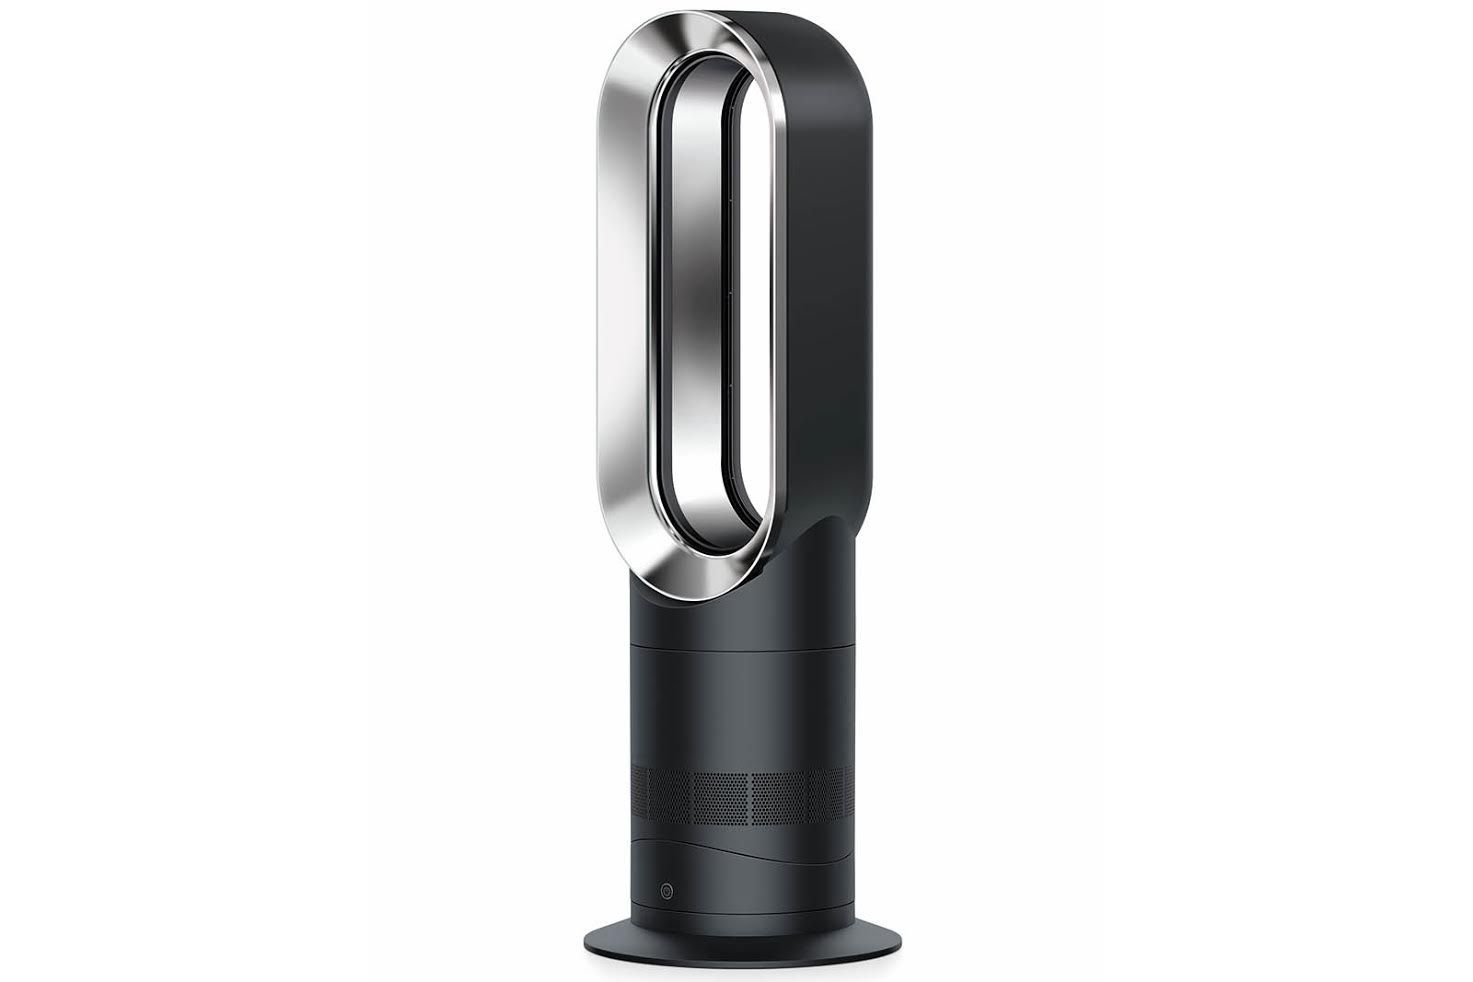 dyson s am09 bladeless fan can blow warm or cold air in two different ways image 1